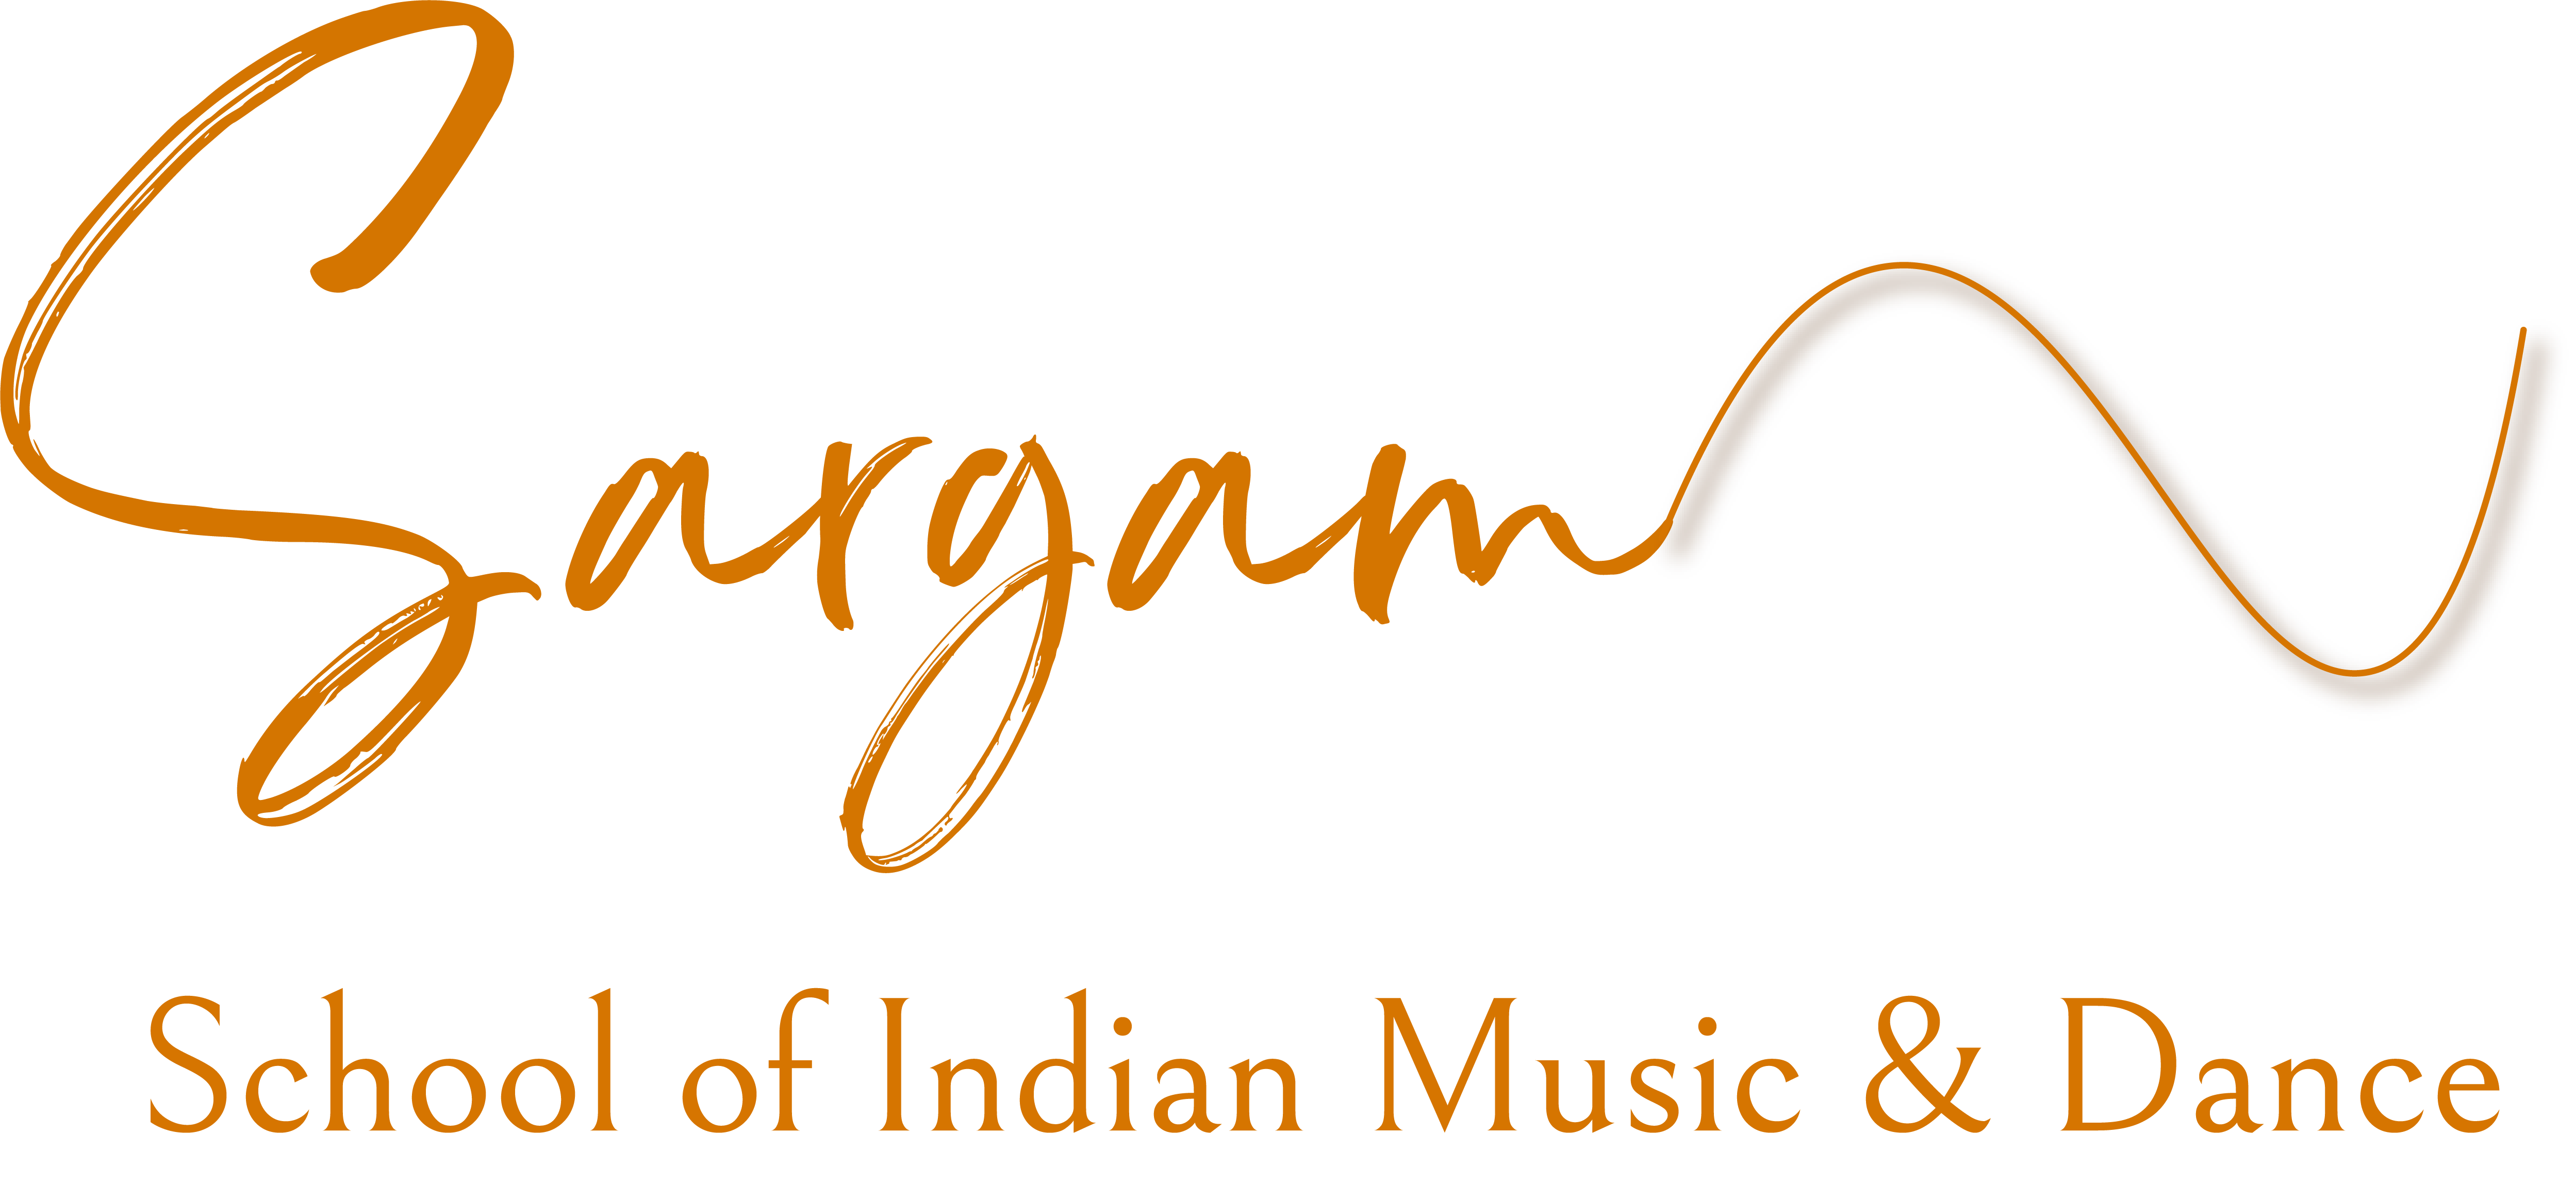 Sargam School Of Indian Music and Dance